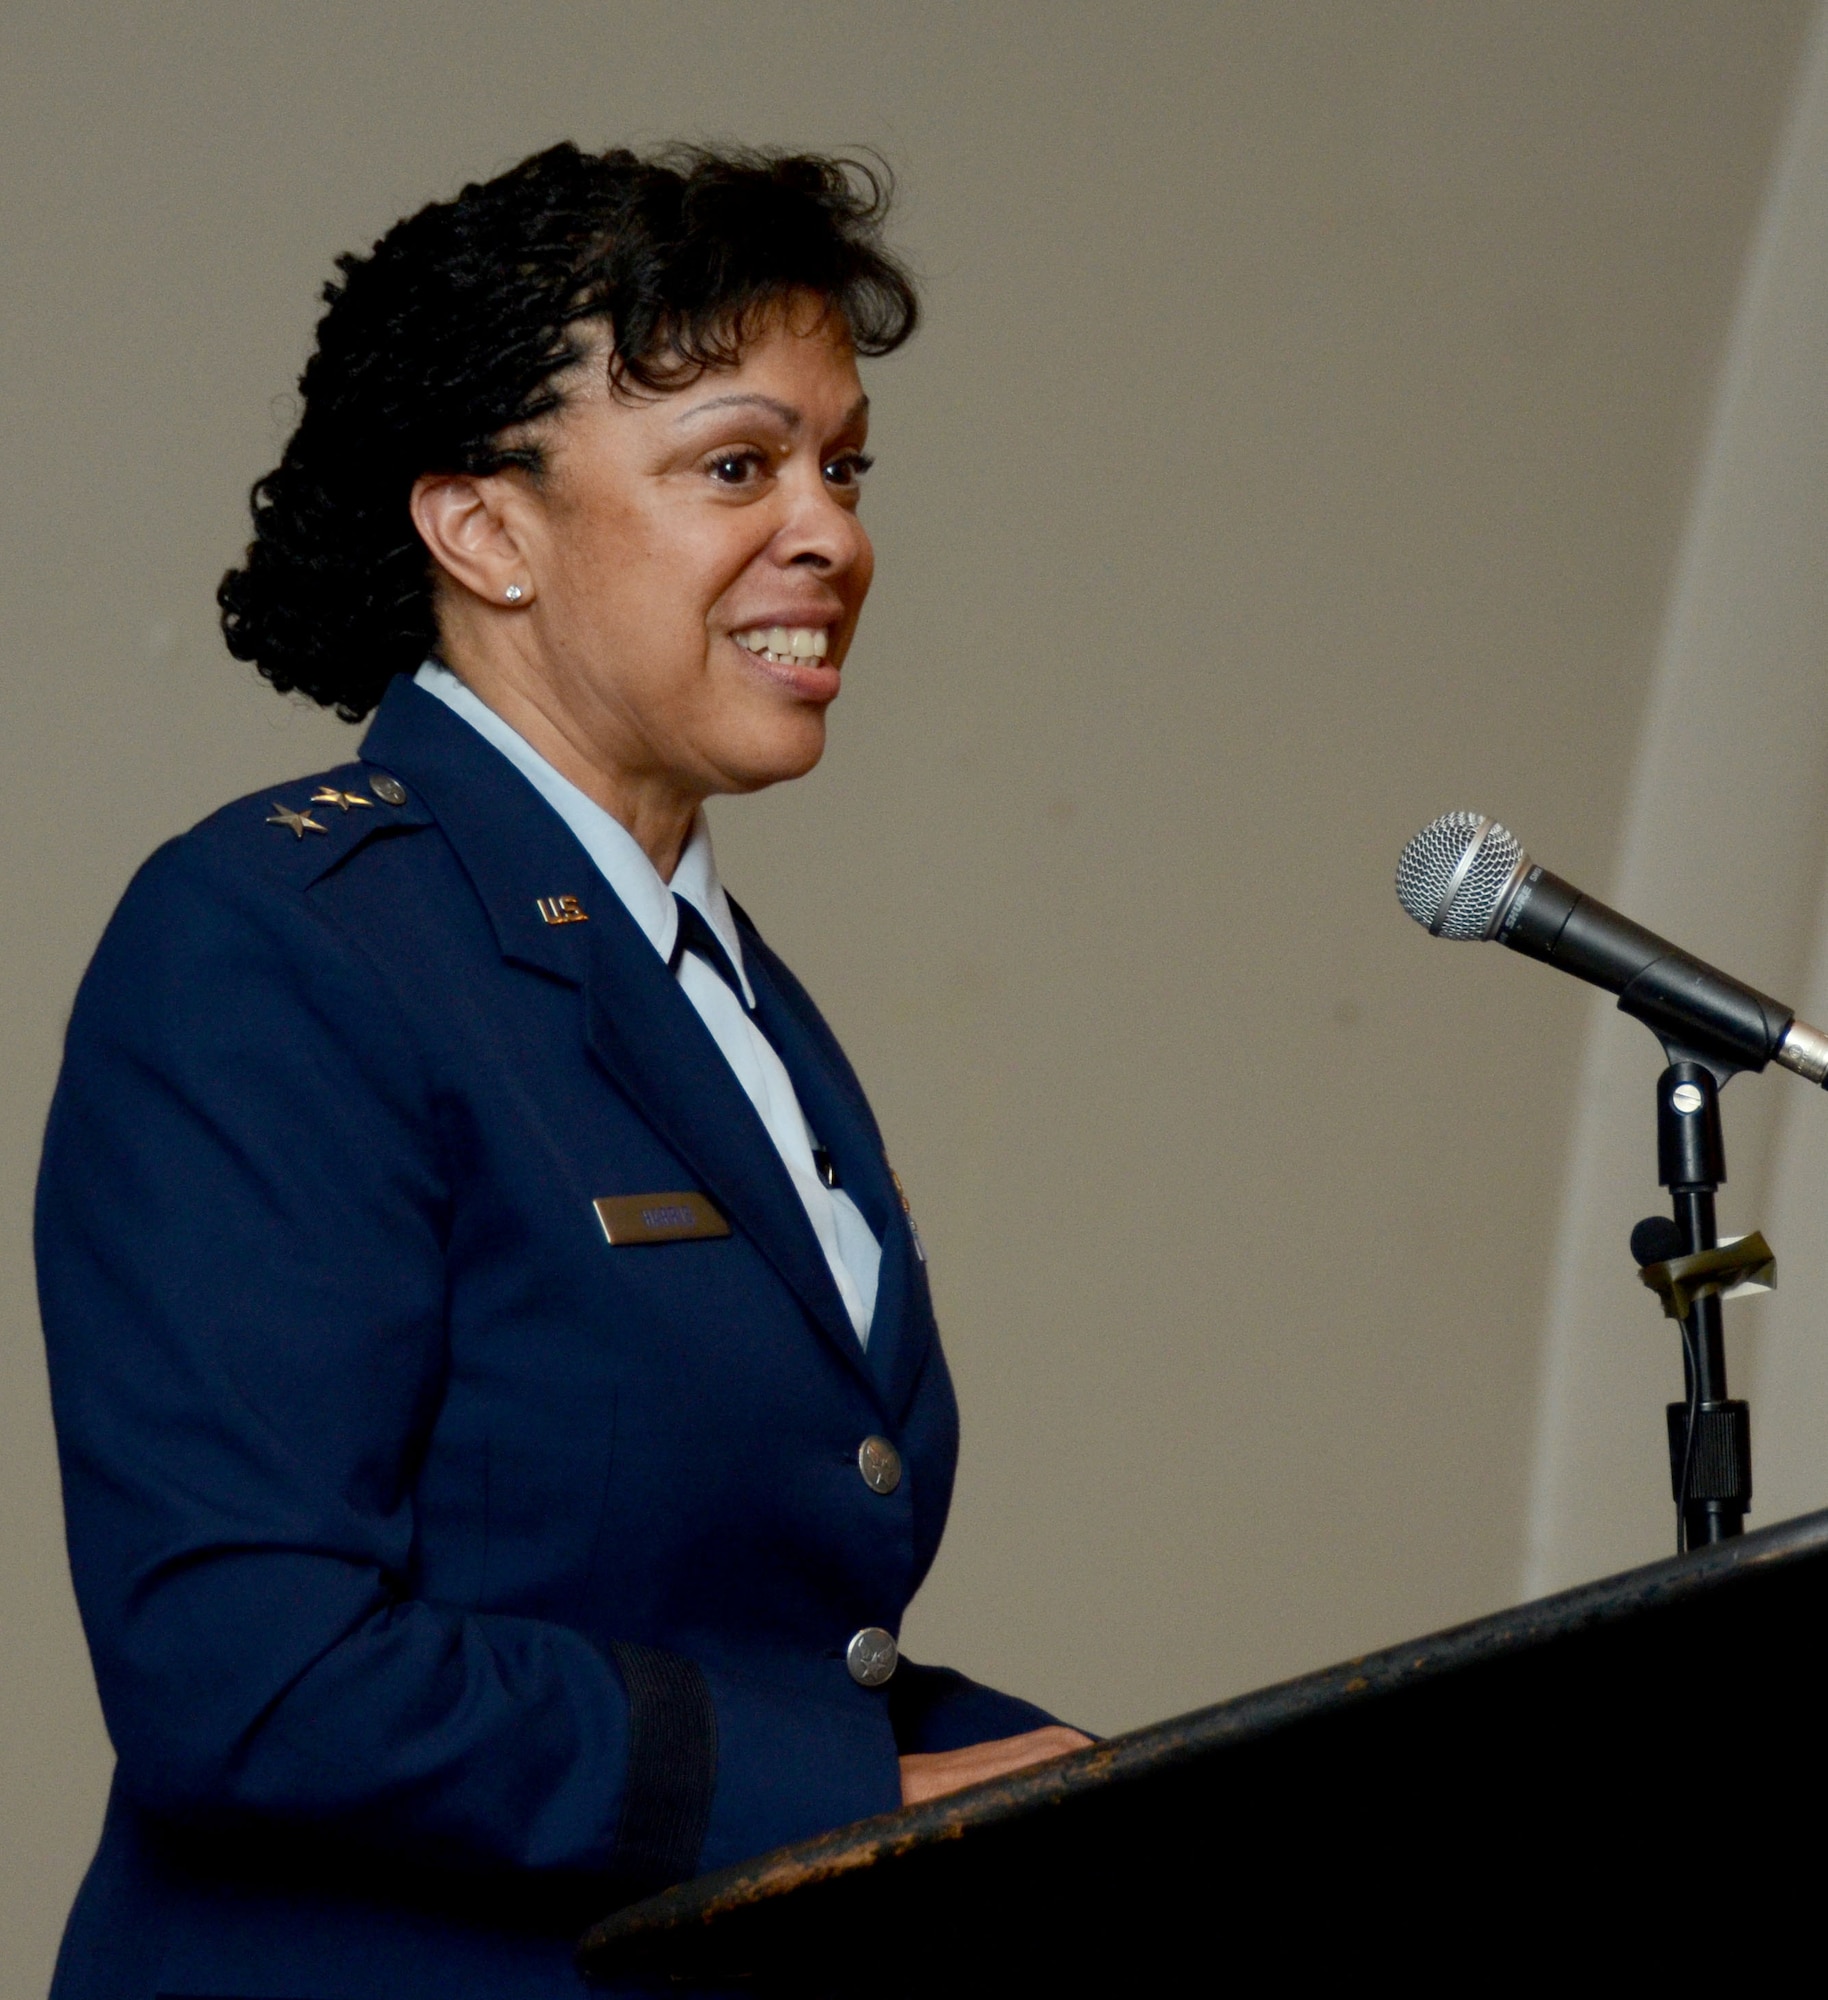 Maj. Gen. Stayce Harris, former 22nd Air Force commander, speaks to speaks to guests at a change of command ceremony in Atlanta, Ga., on Aug. 8, 2016. Harris relinquished command of the 22nd Air Force to Maj. Gen. John Stokes. (U.S. Air Force photo/ Don Peek)